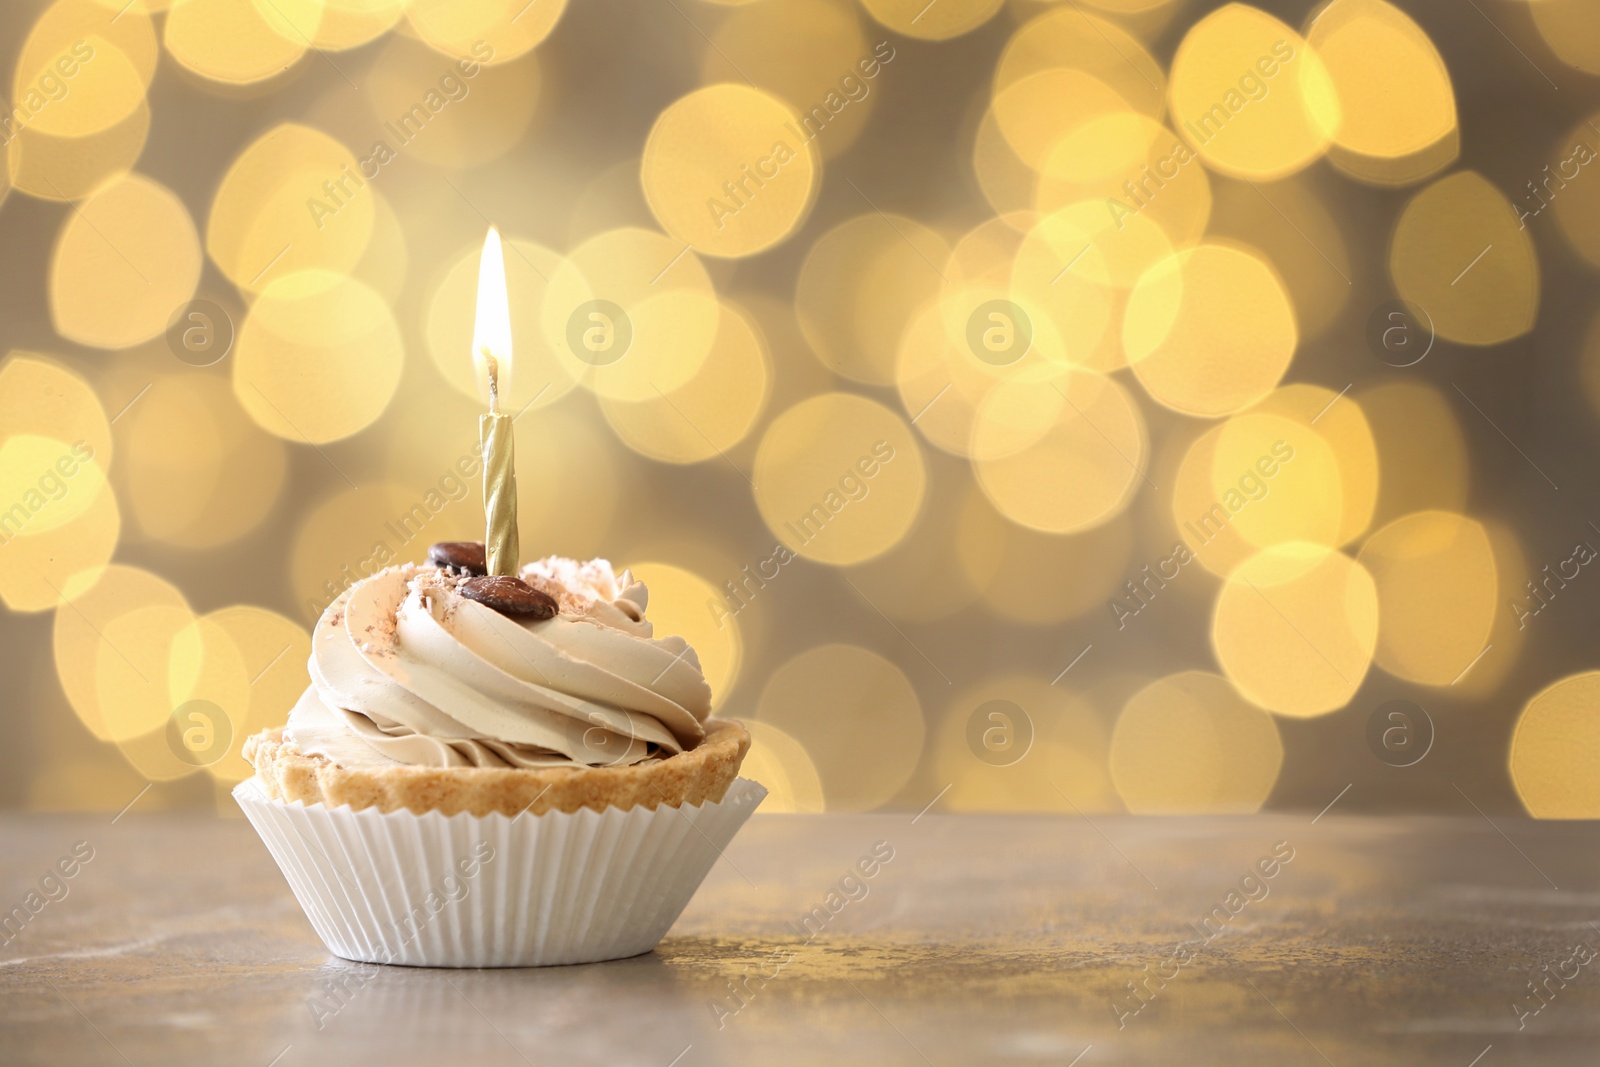 Photo of Tasty birthday cupcake with candle on table against blurred lights, space for text